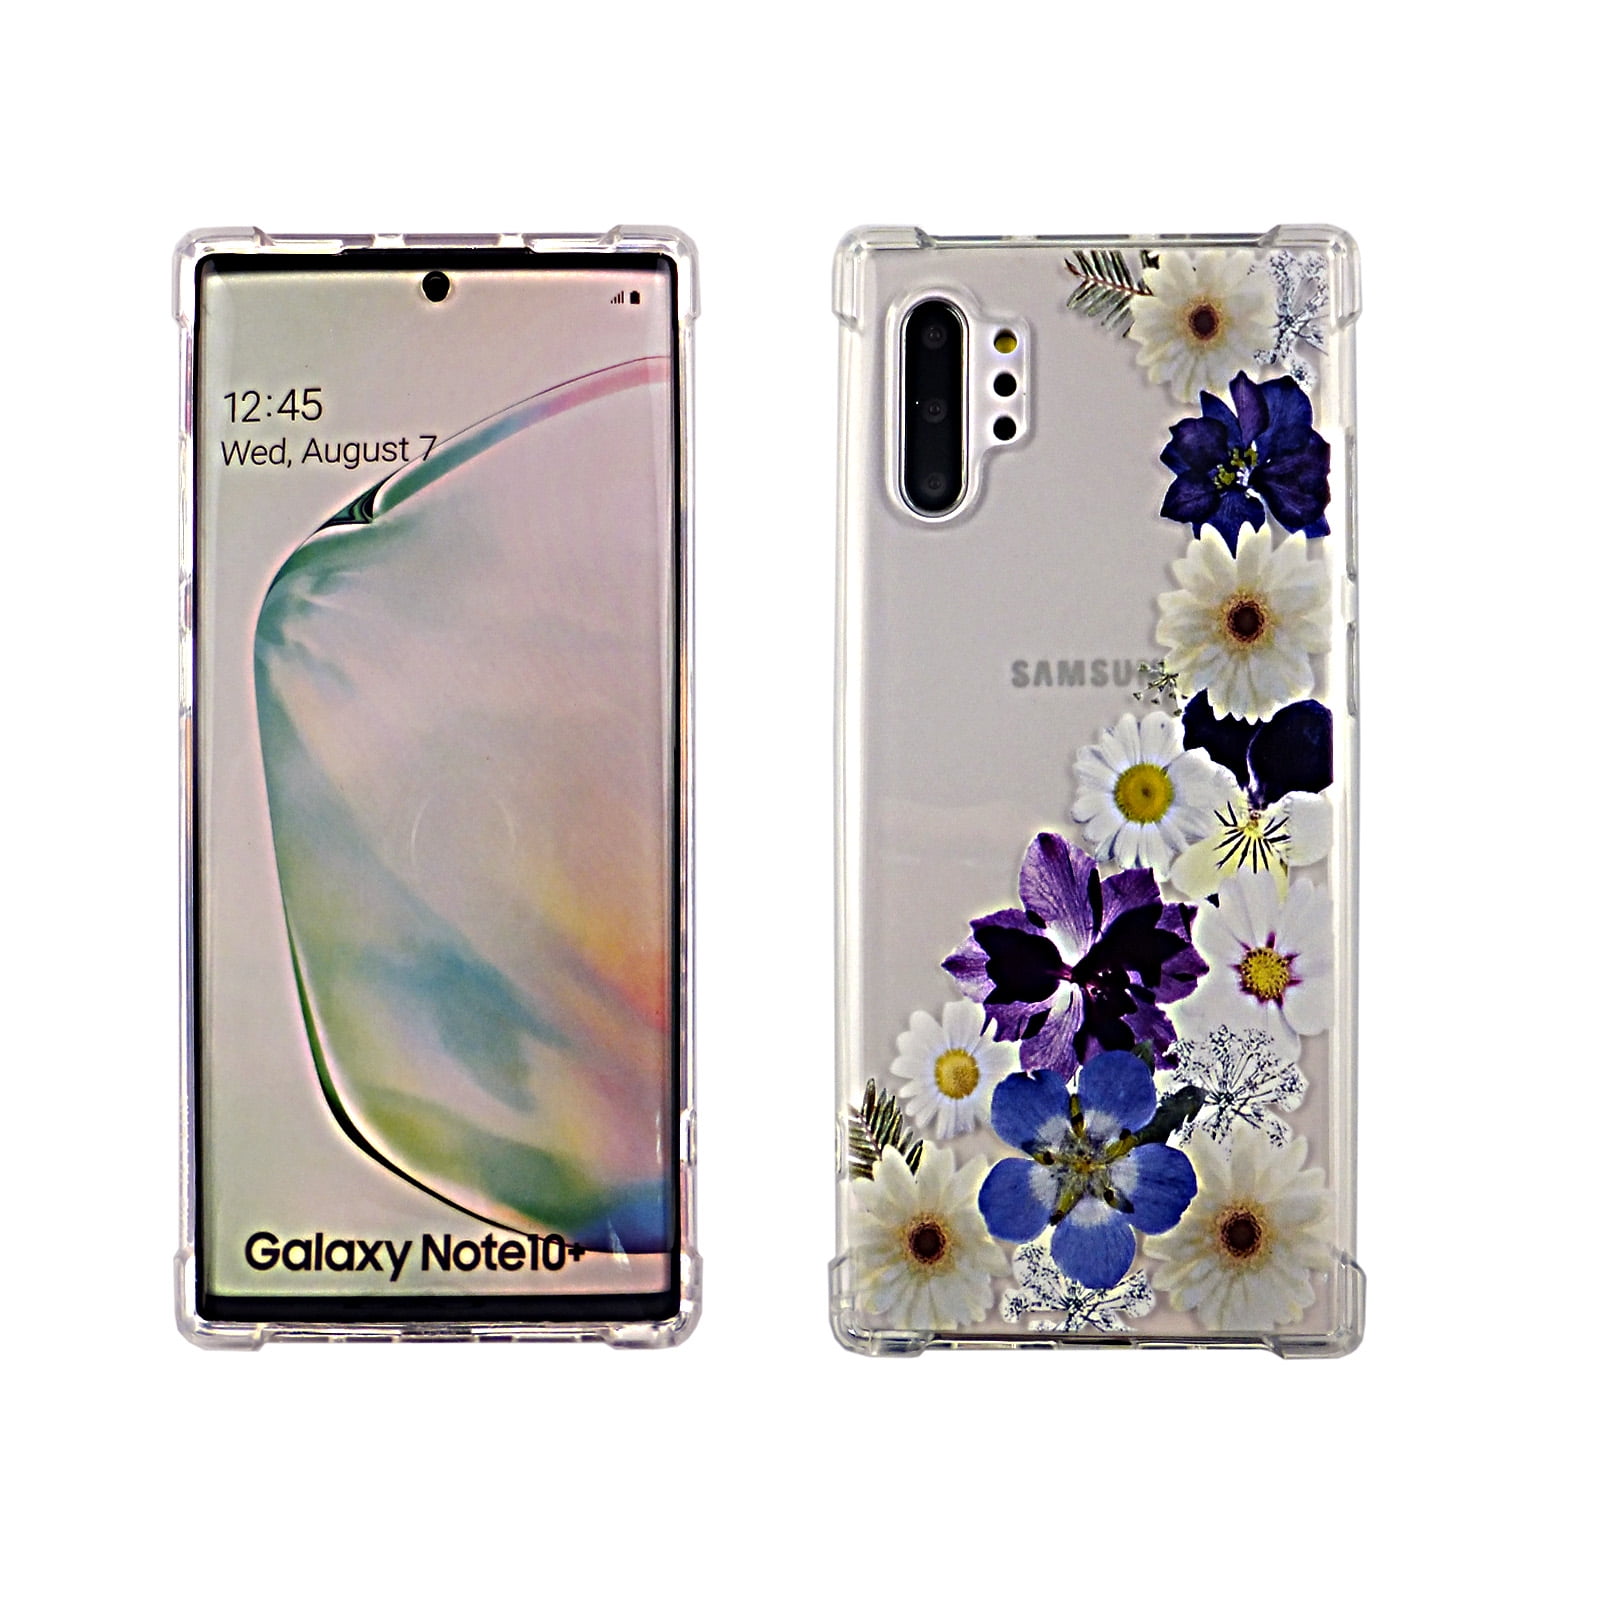 kwmobile Case Compatible with Samsung Galaxy Note 10 Lite Case - Soft Slim  Protective TPU Silicone Cover - Light Lavender